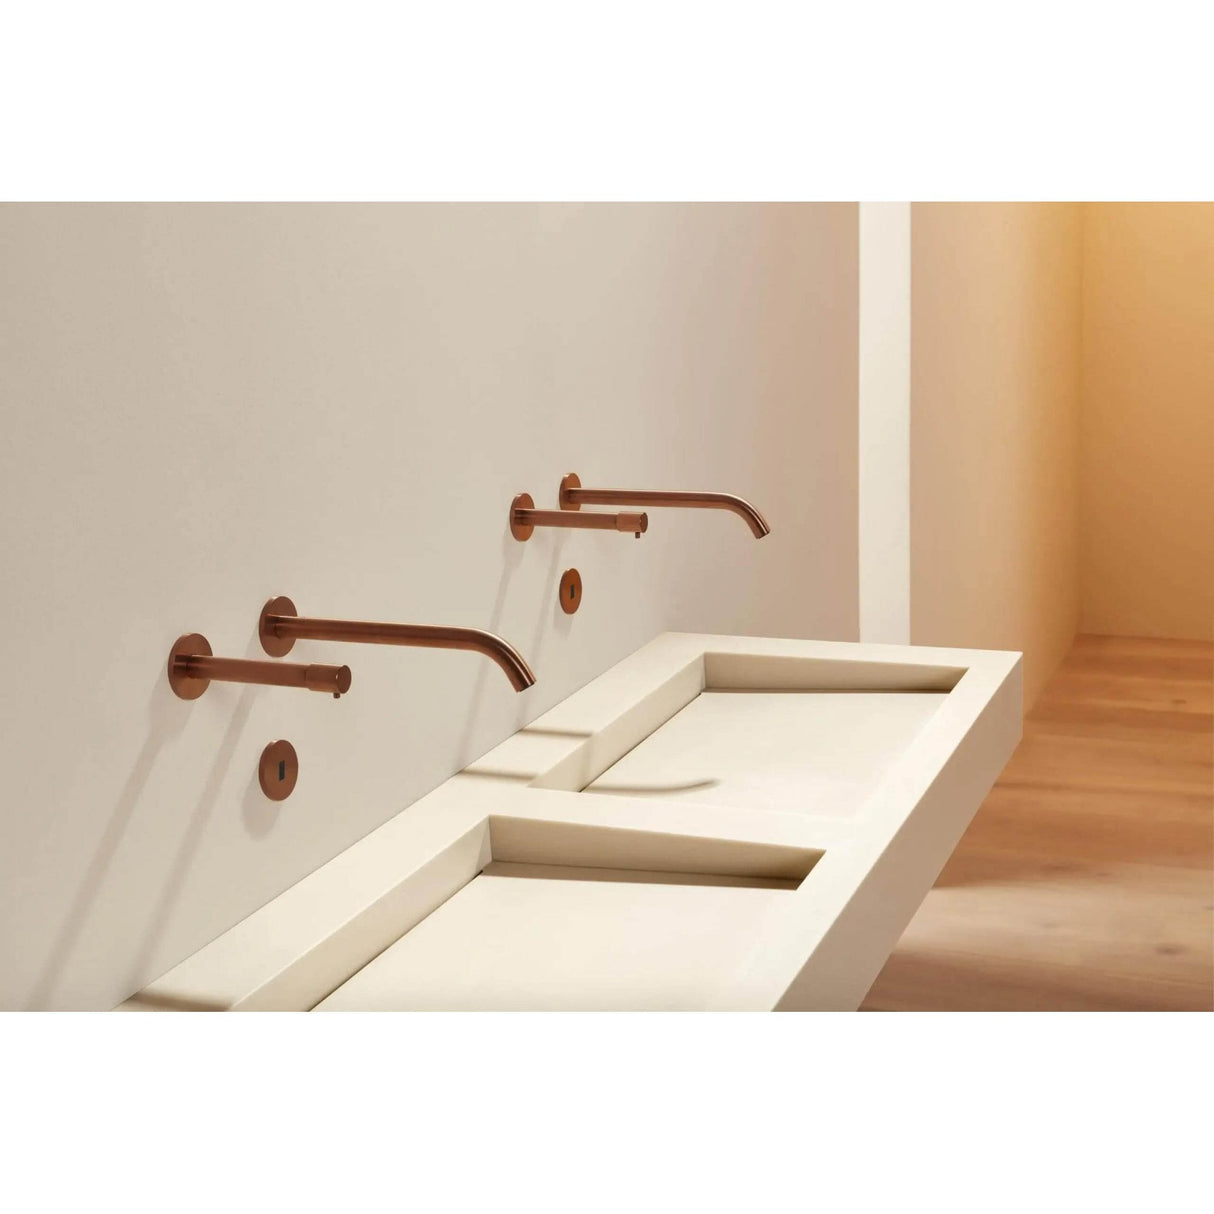 The Monolith M+ or L+ Series Wall Mounted Wash Basin L.2400mm (450 or 600mm Depth)